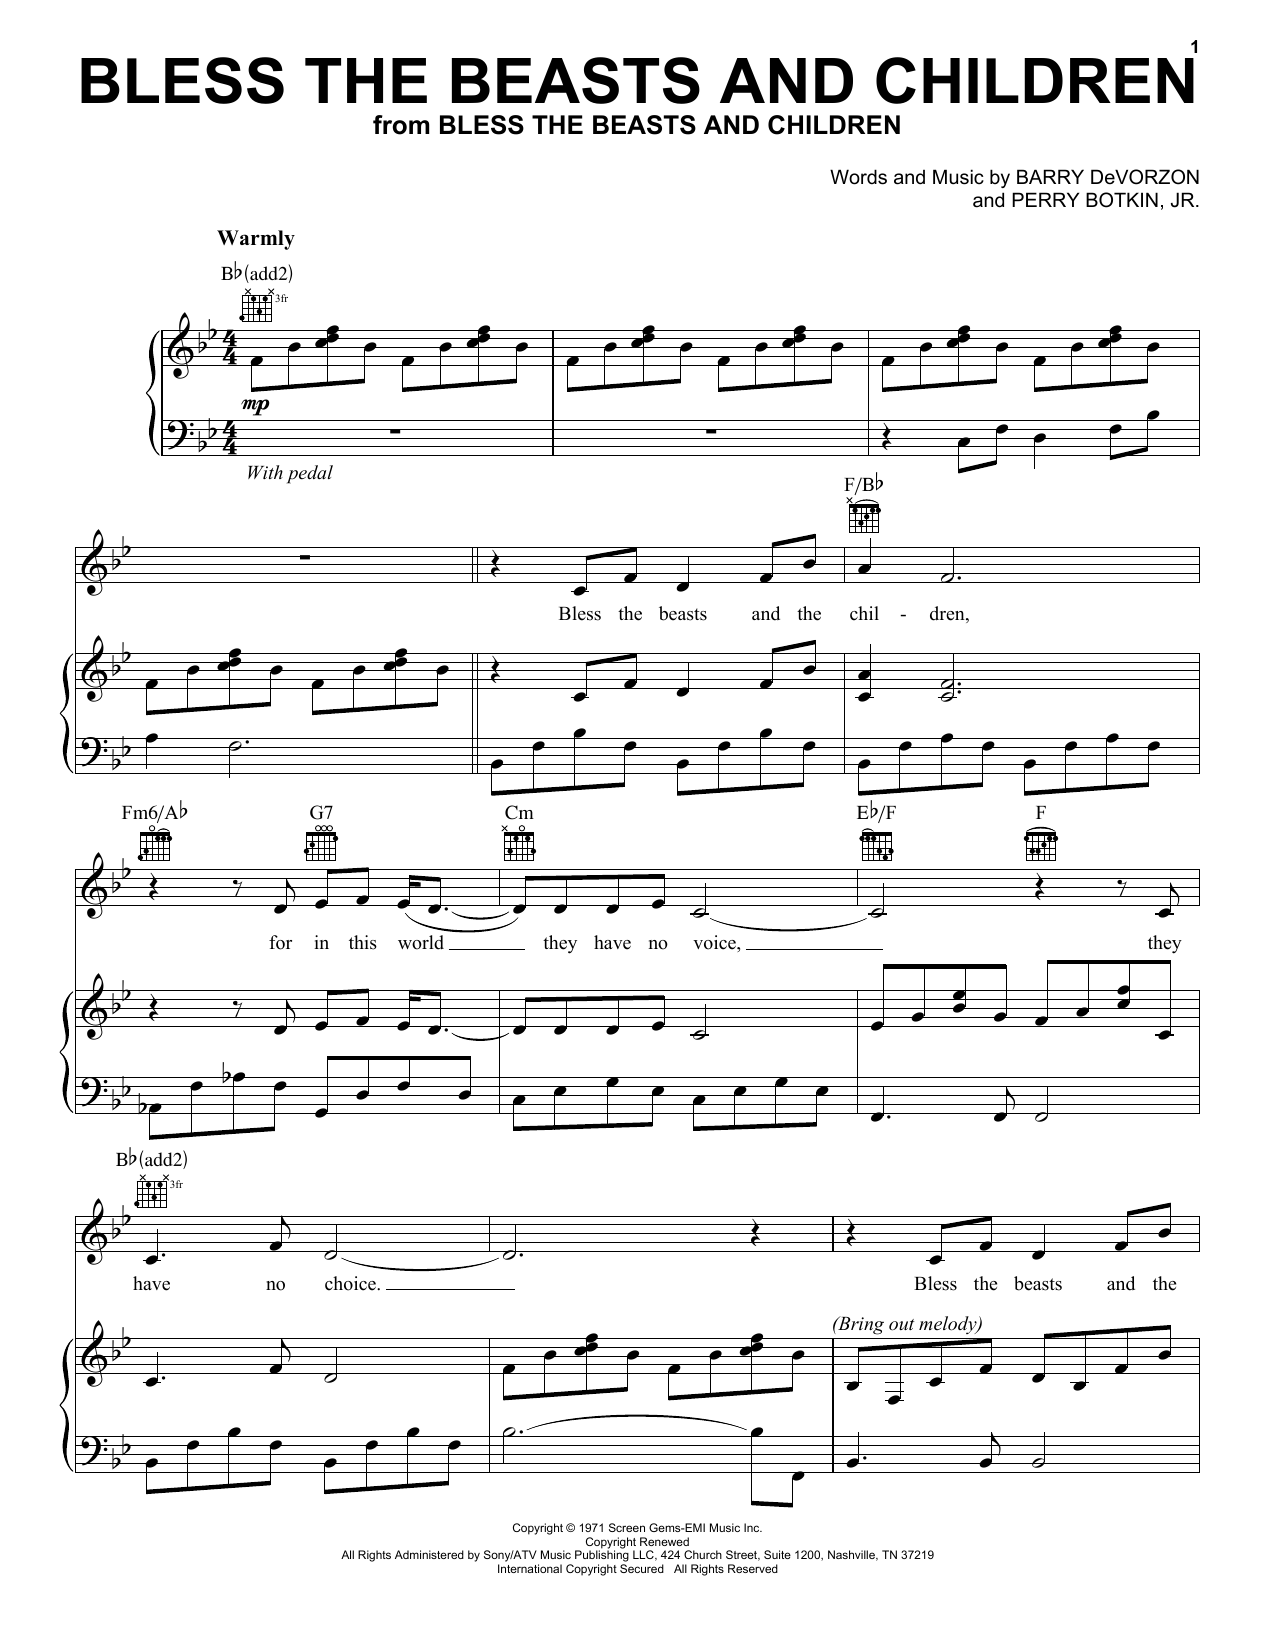 Carpenters Bless The Beasts And Children sheet music notes and chords. Download Printable PDF.